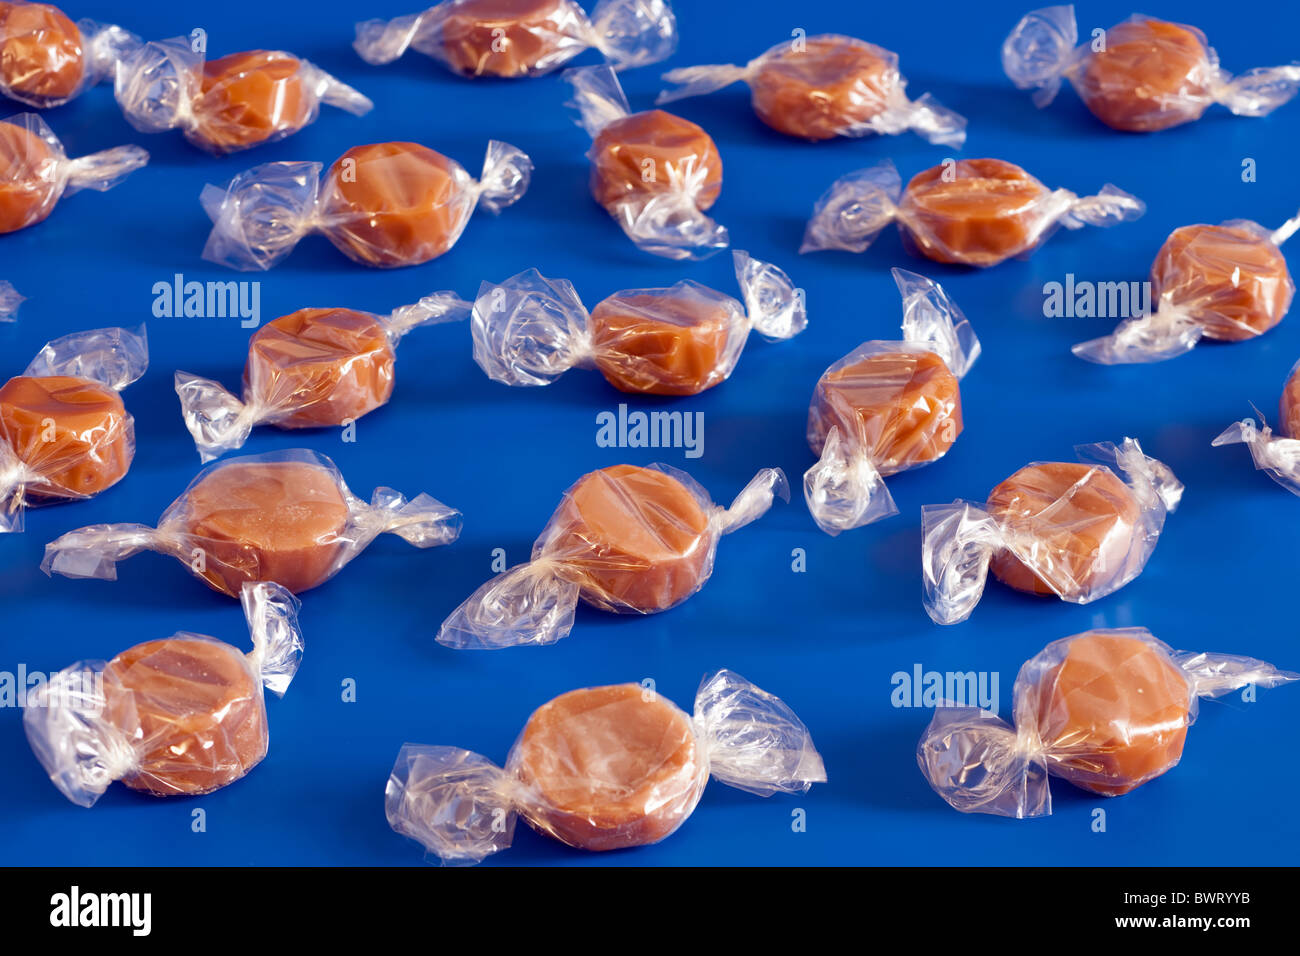 Pile of clear cellophane wrapped toffee sweets Stock Photo